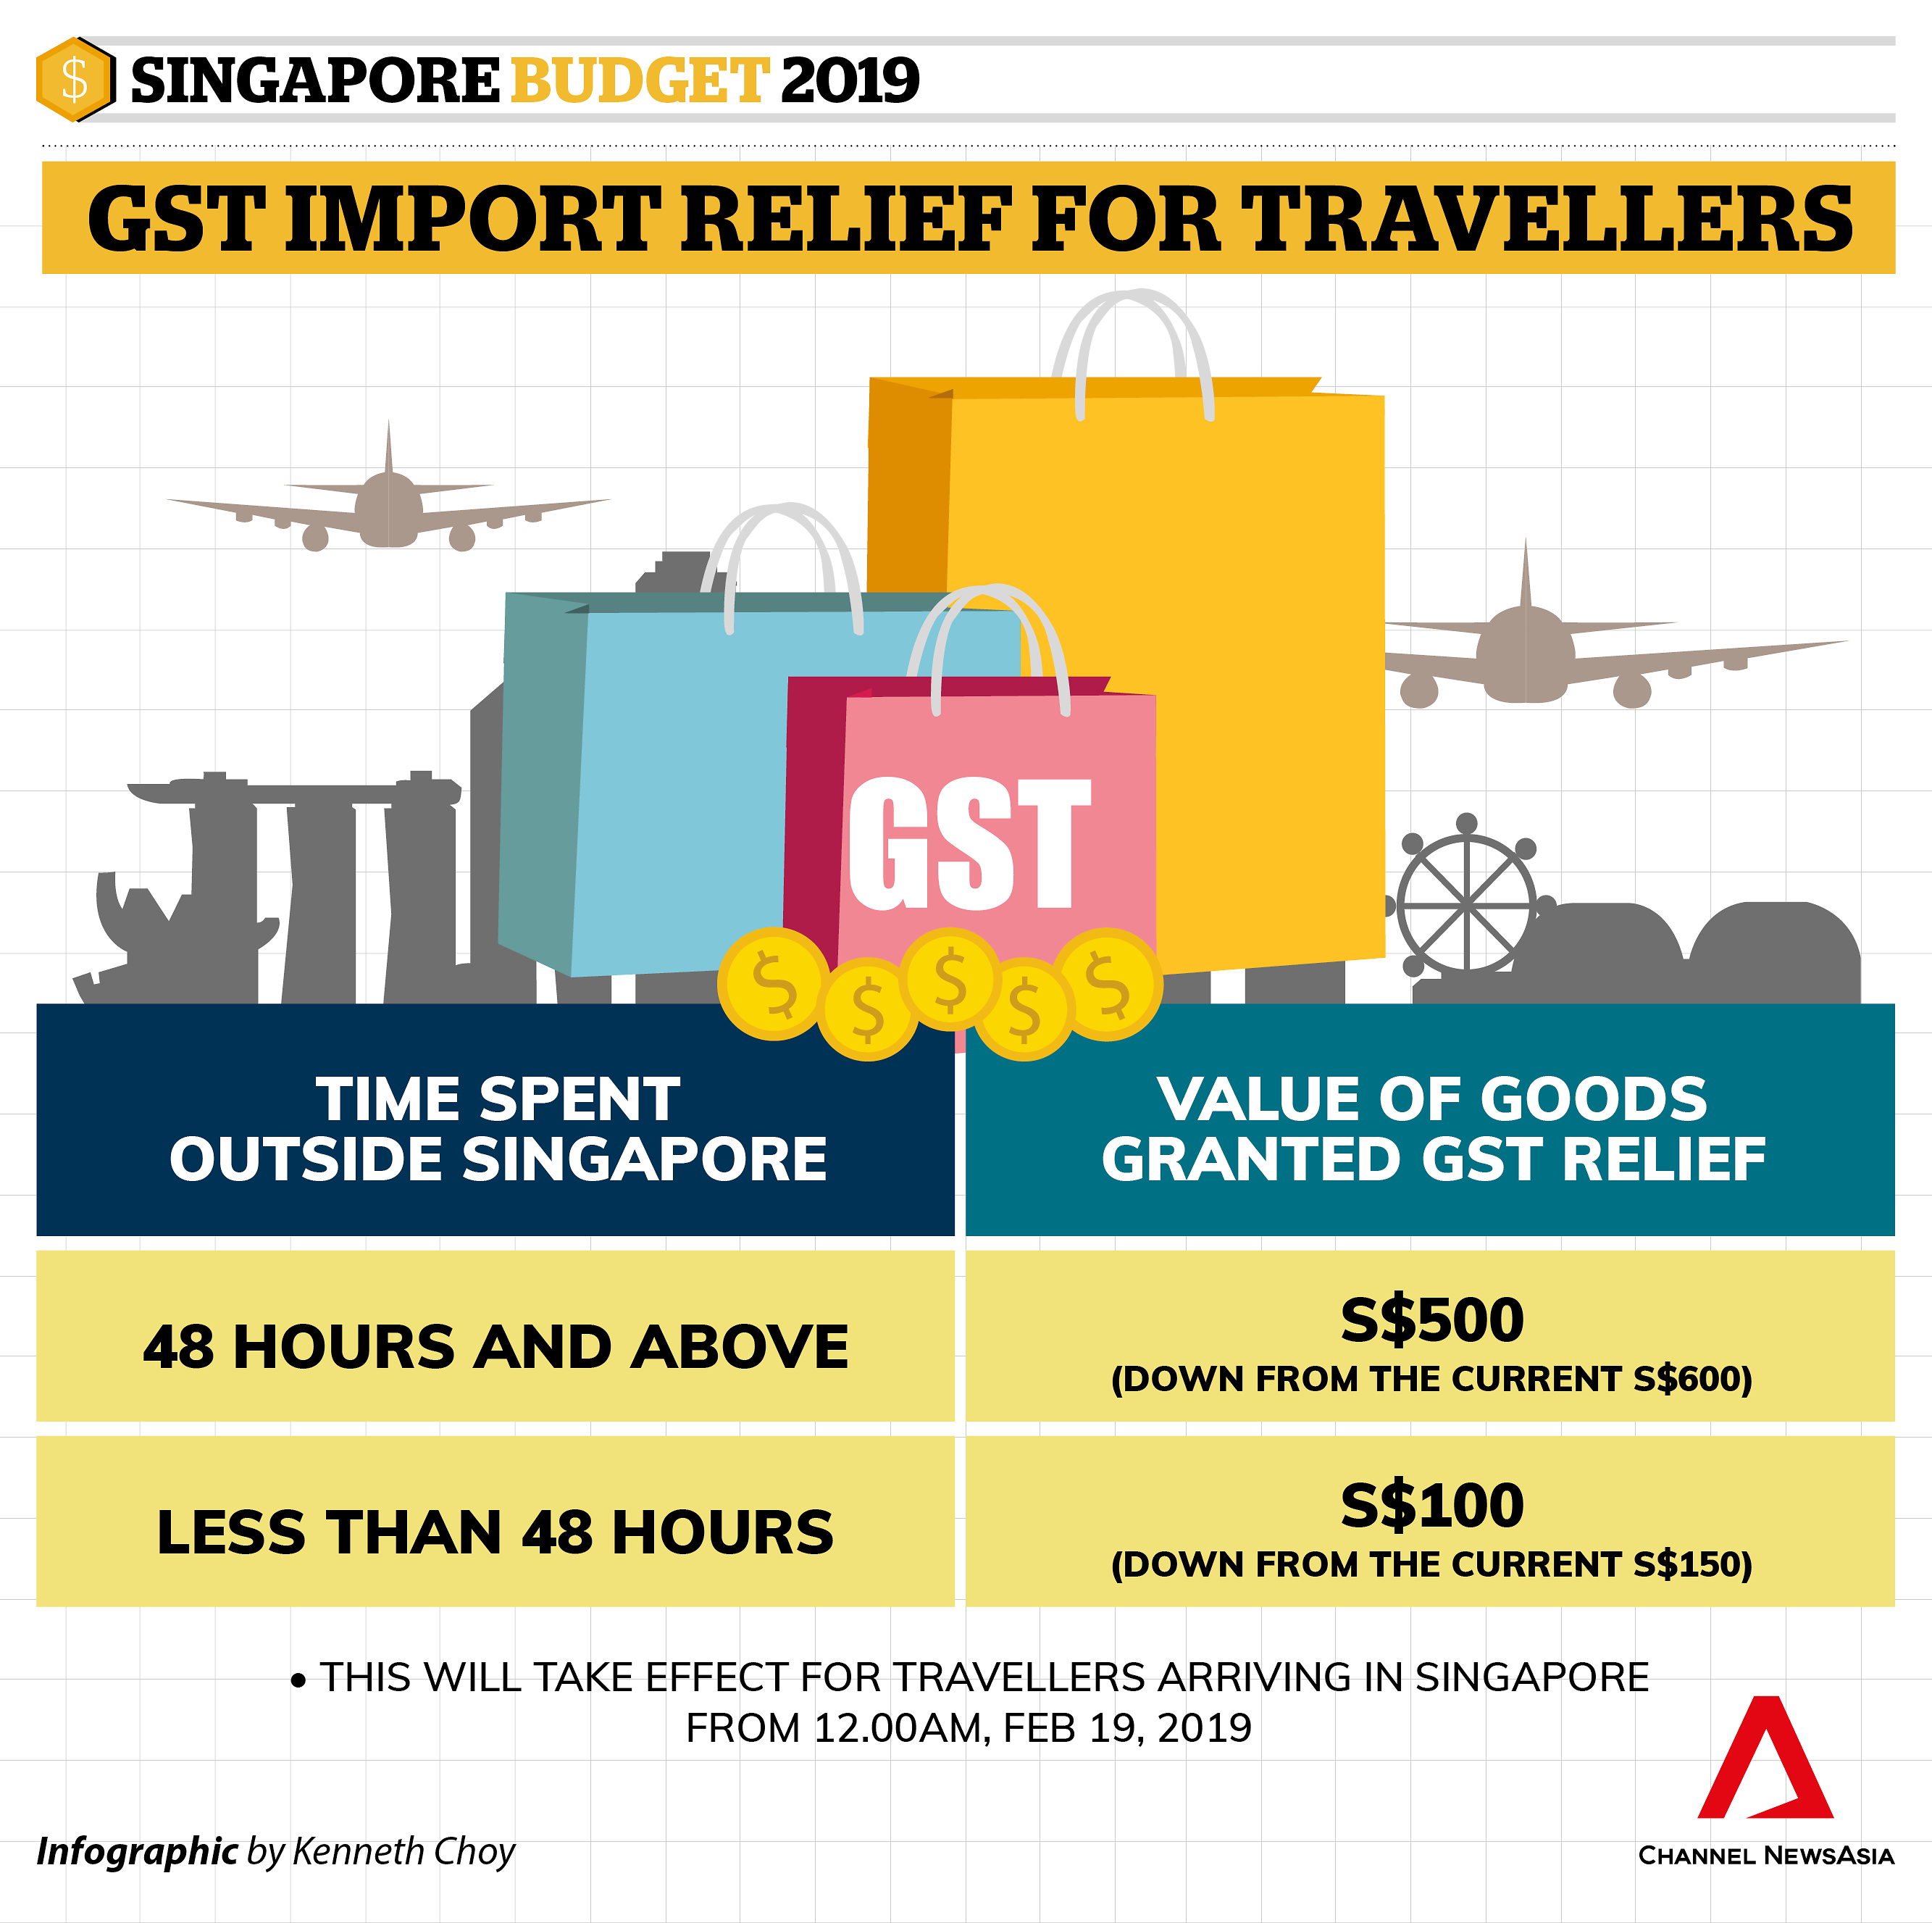 Budget 2019 Travellers to get lower allowance for GSTfree purchases